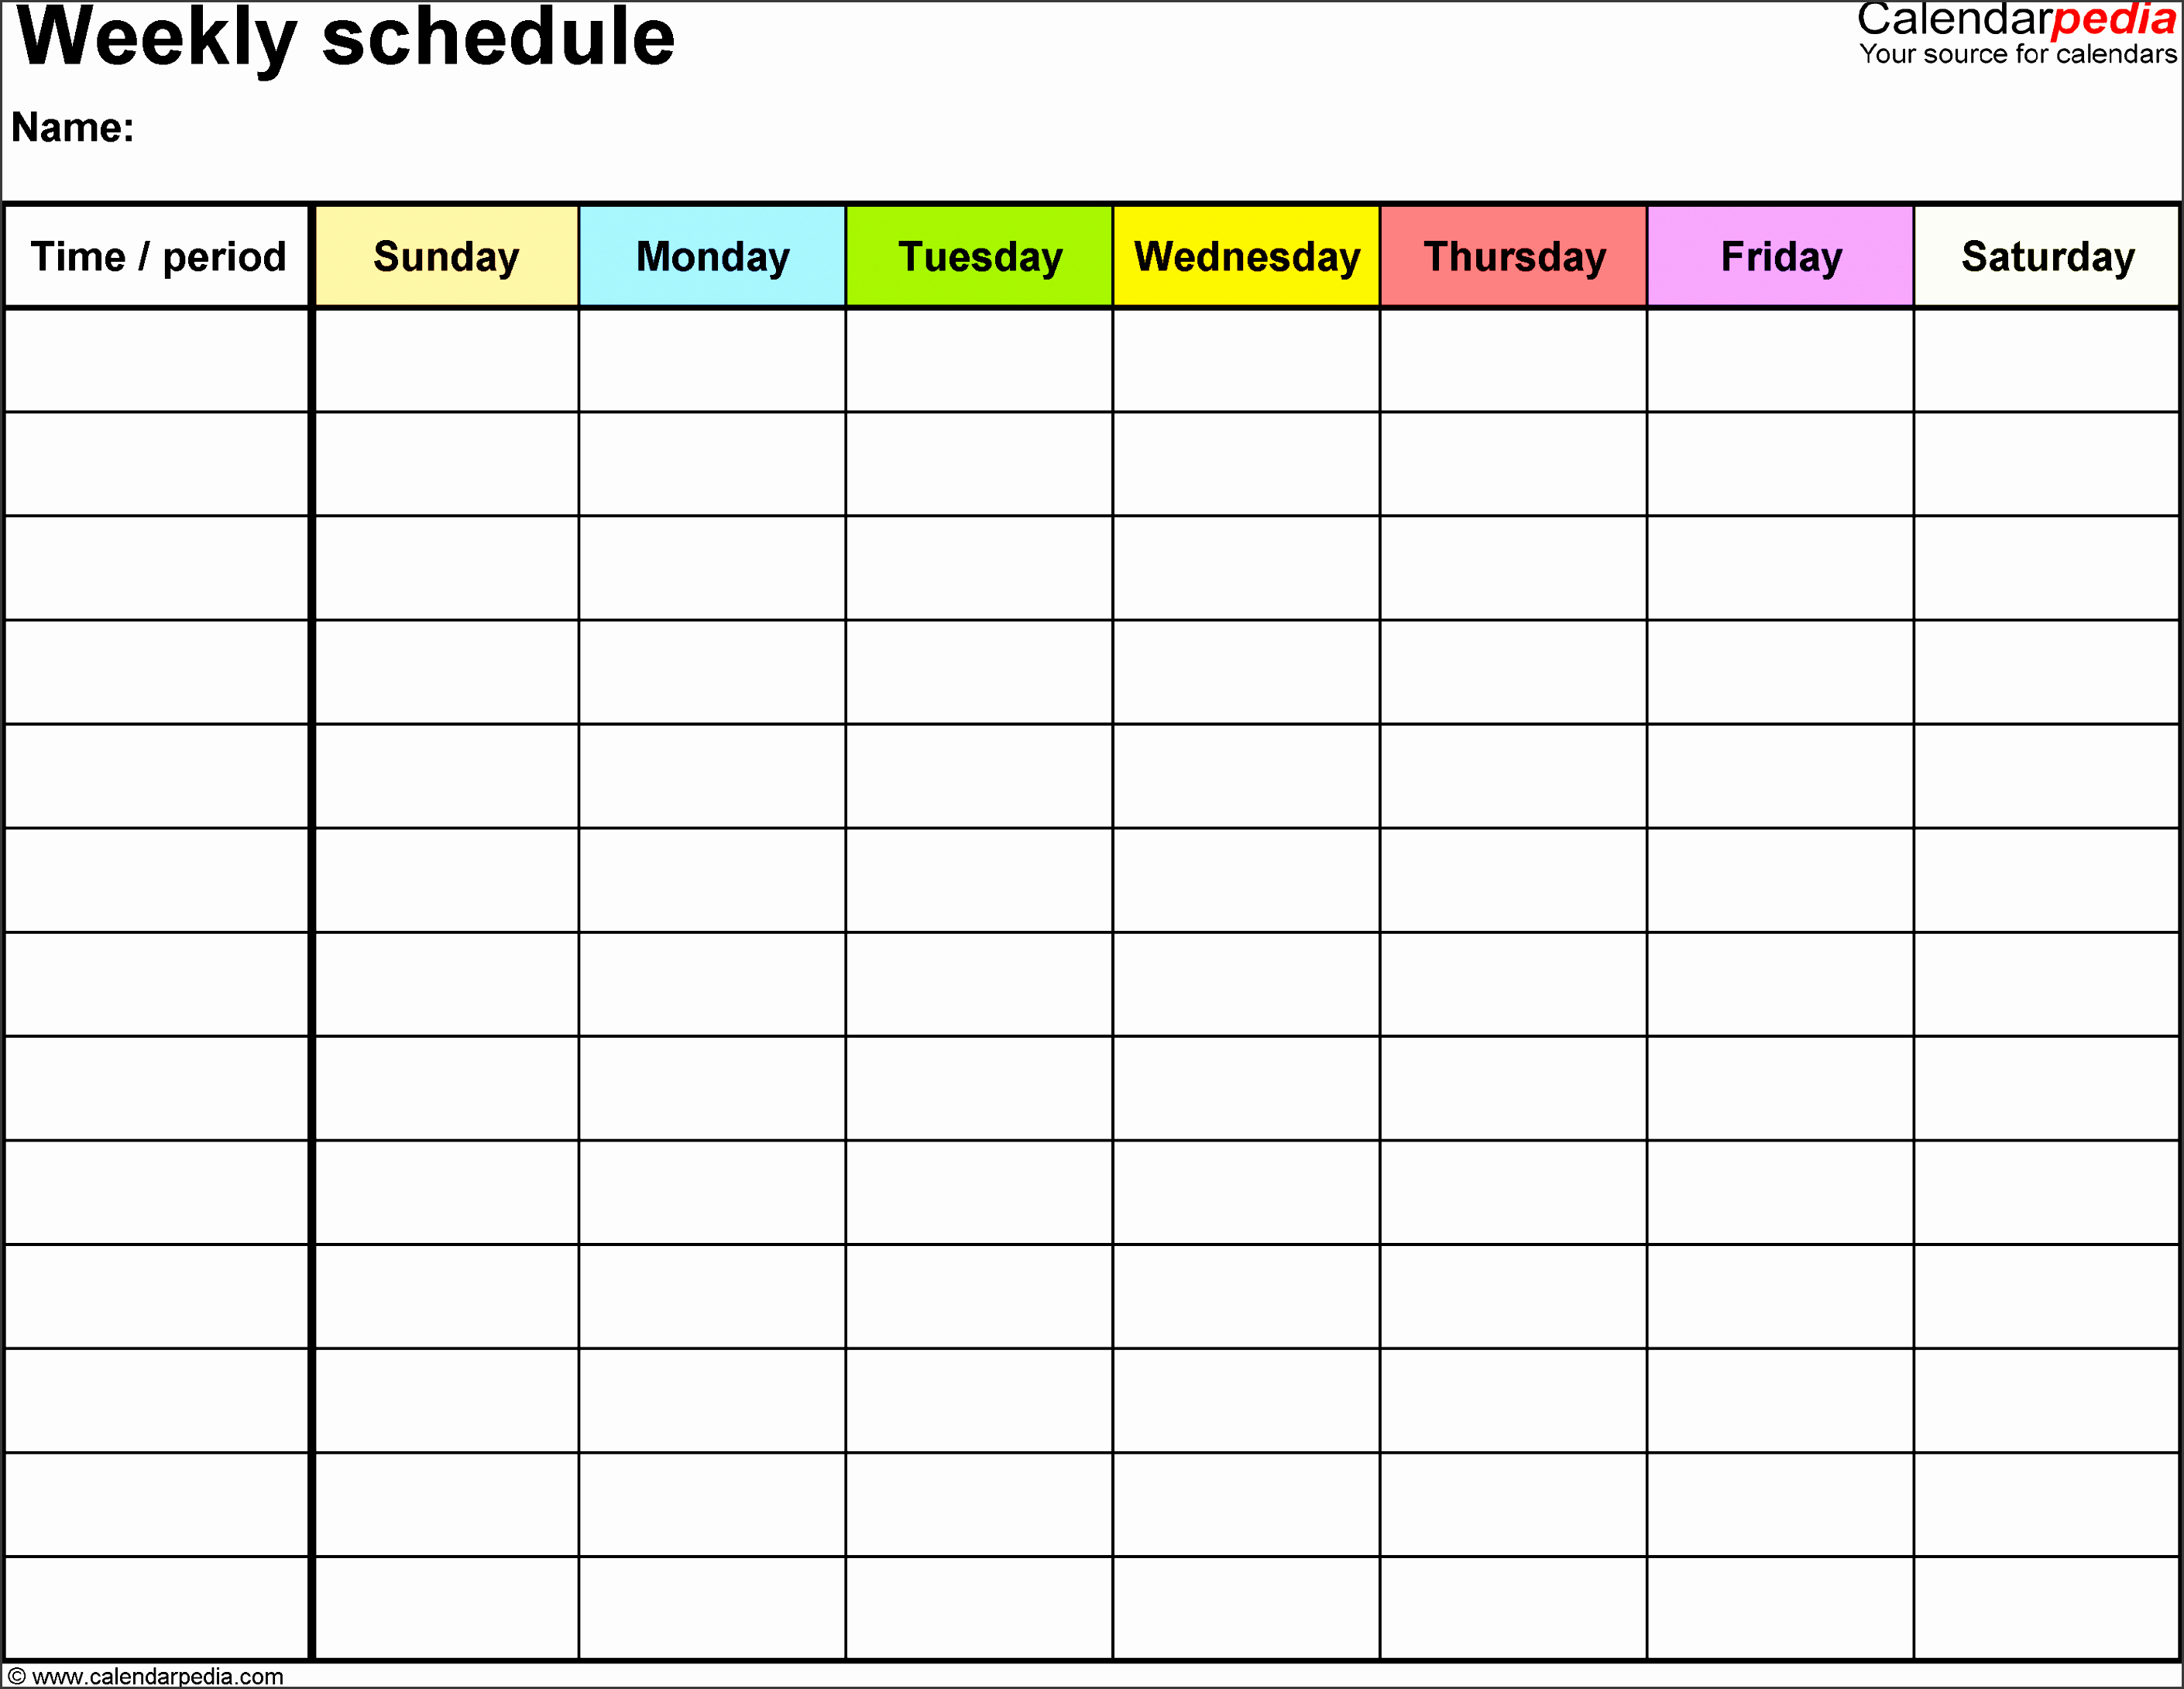 weekly schedule template for excel version 13 landscape 1 page sunday to saturday